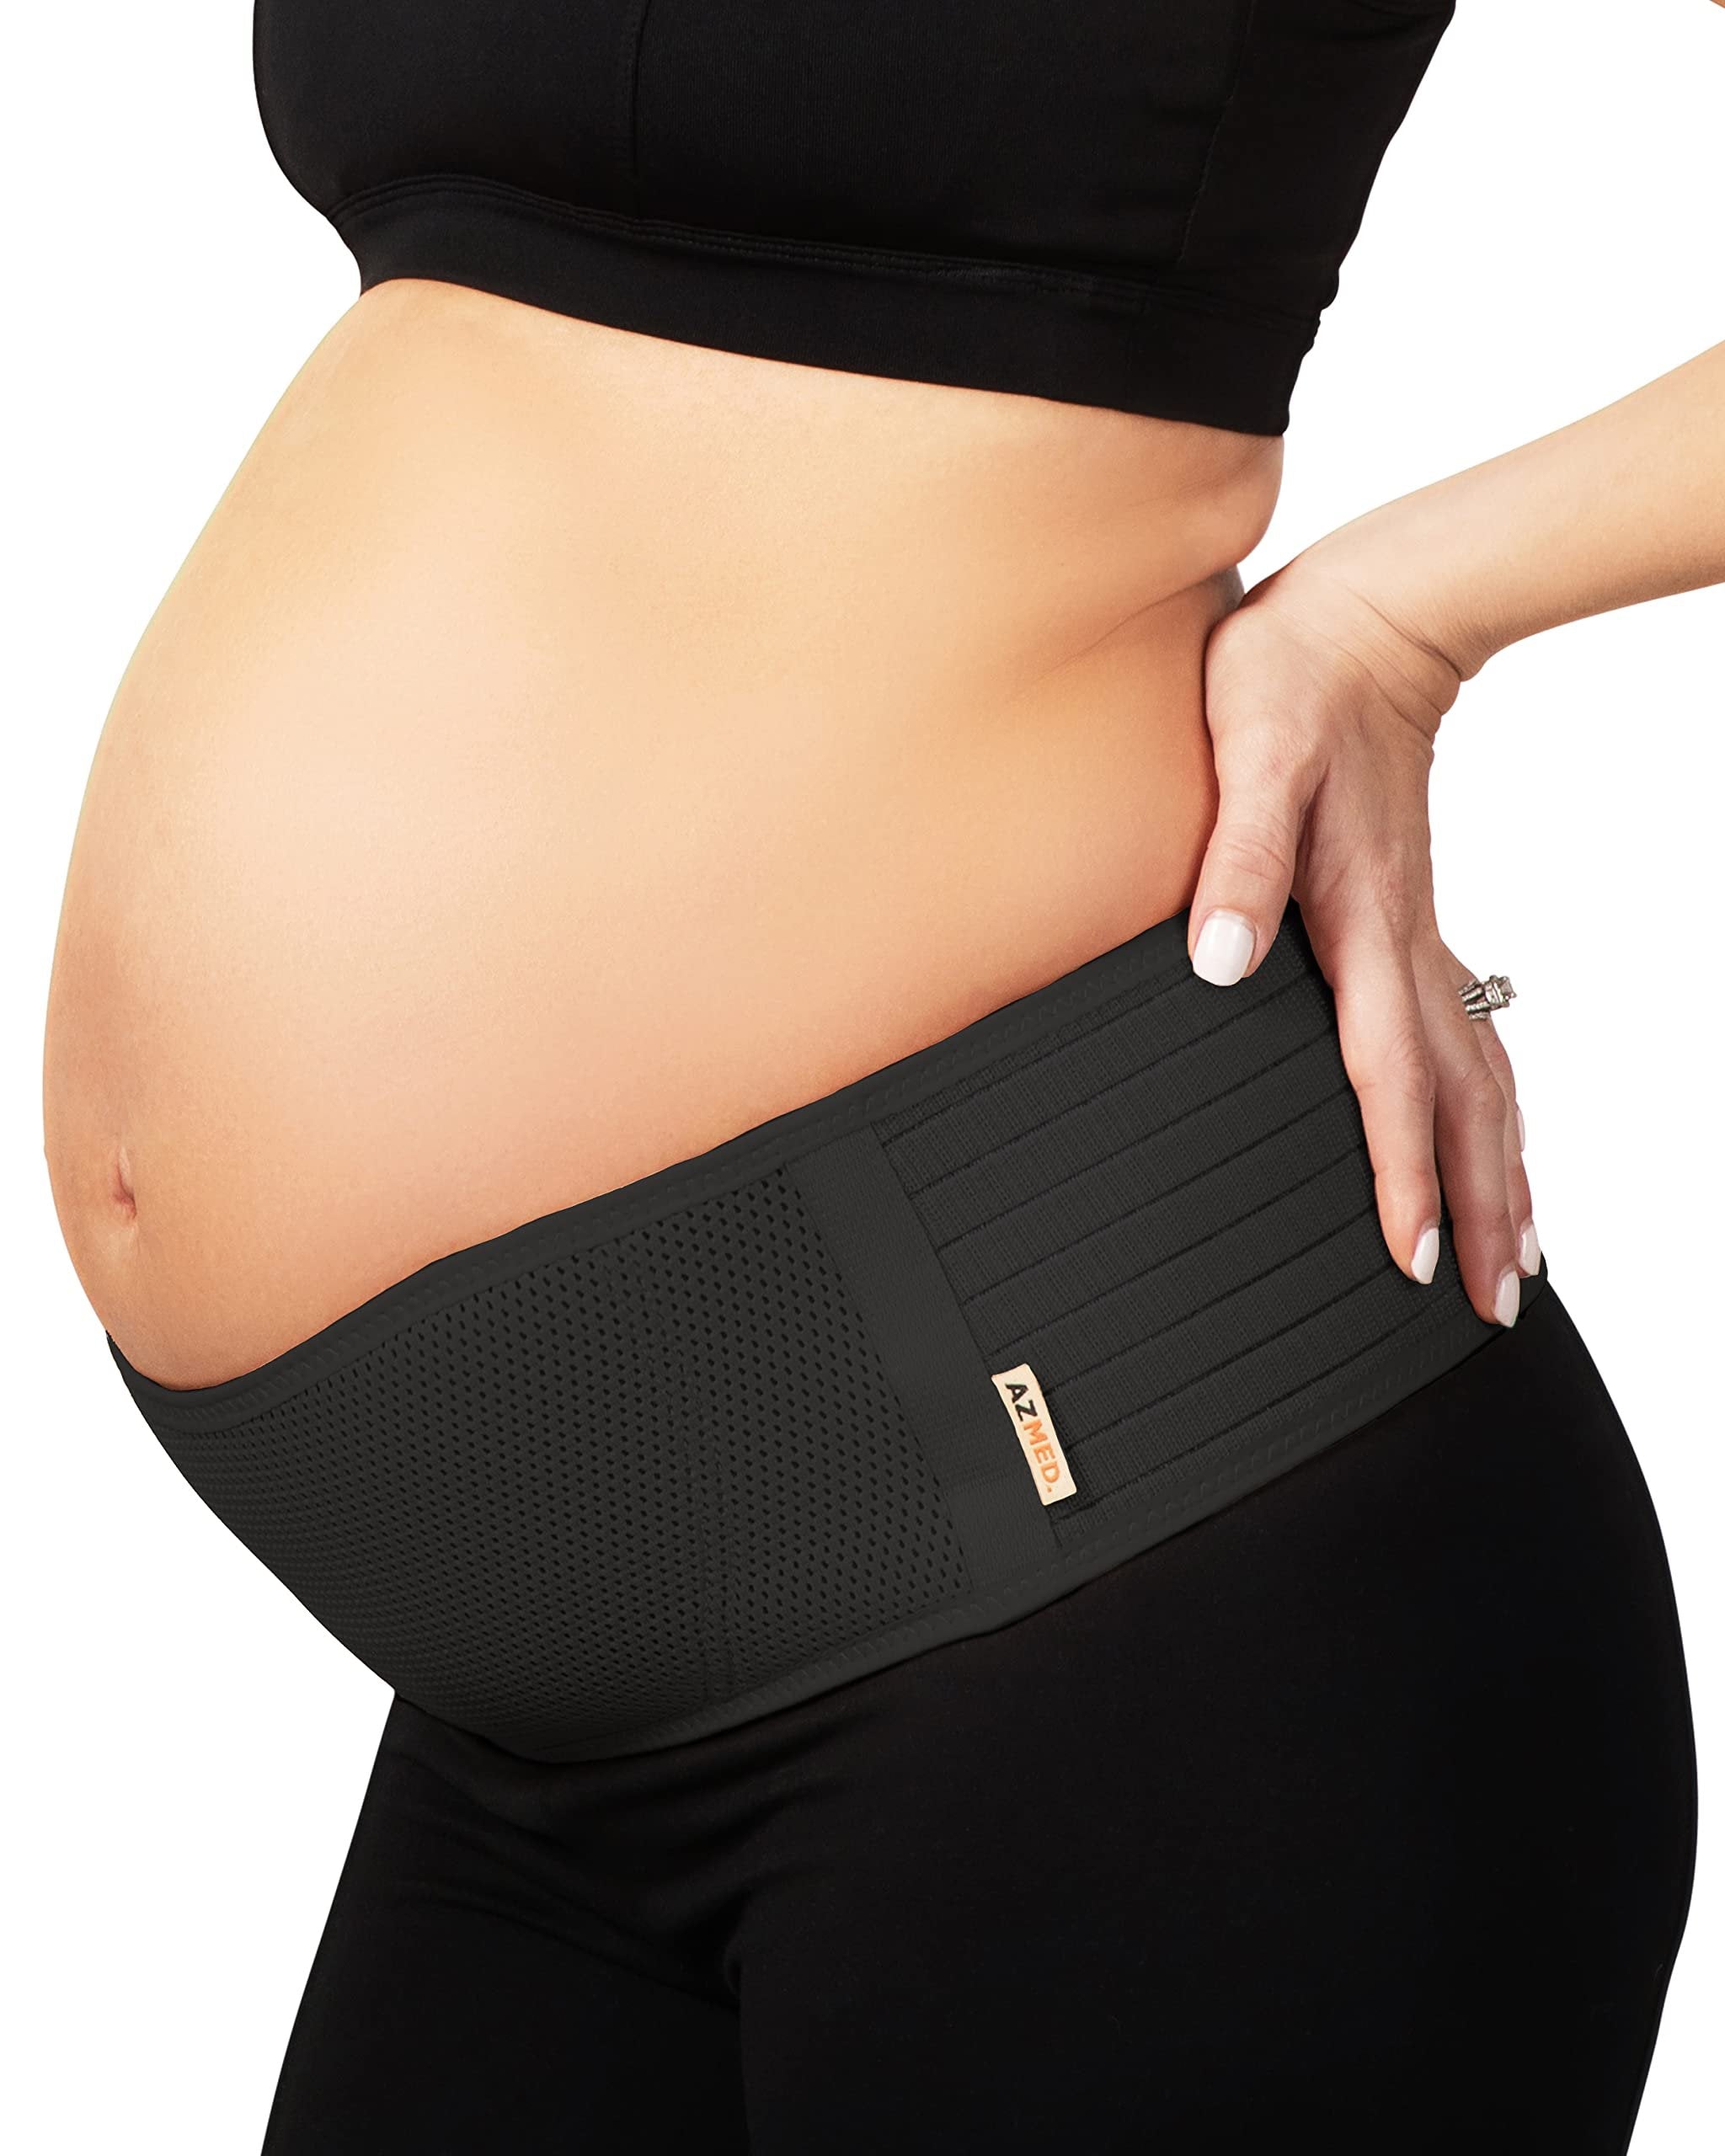 AZMED Maternity Belly Band | Breathable Pregnancy Support for Abdomen, Pelvic, & Back Pain | Adjustable Belt for All Stages (Black, One Size) - Free Shipping & Returns